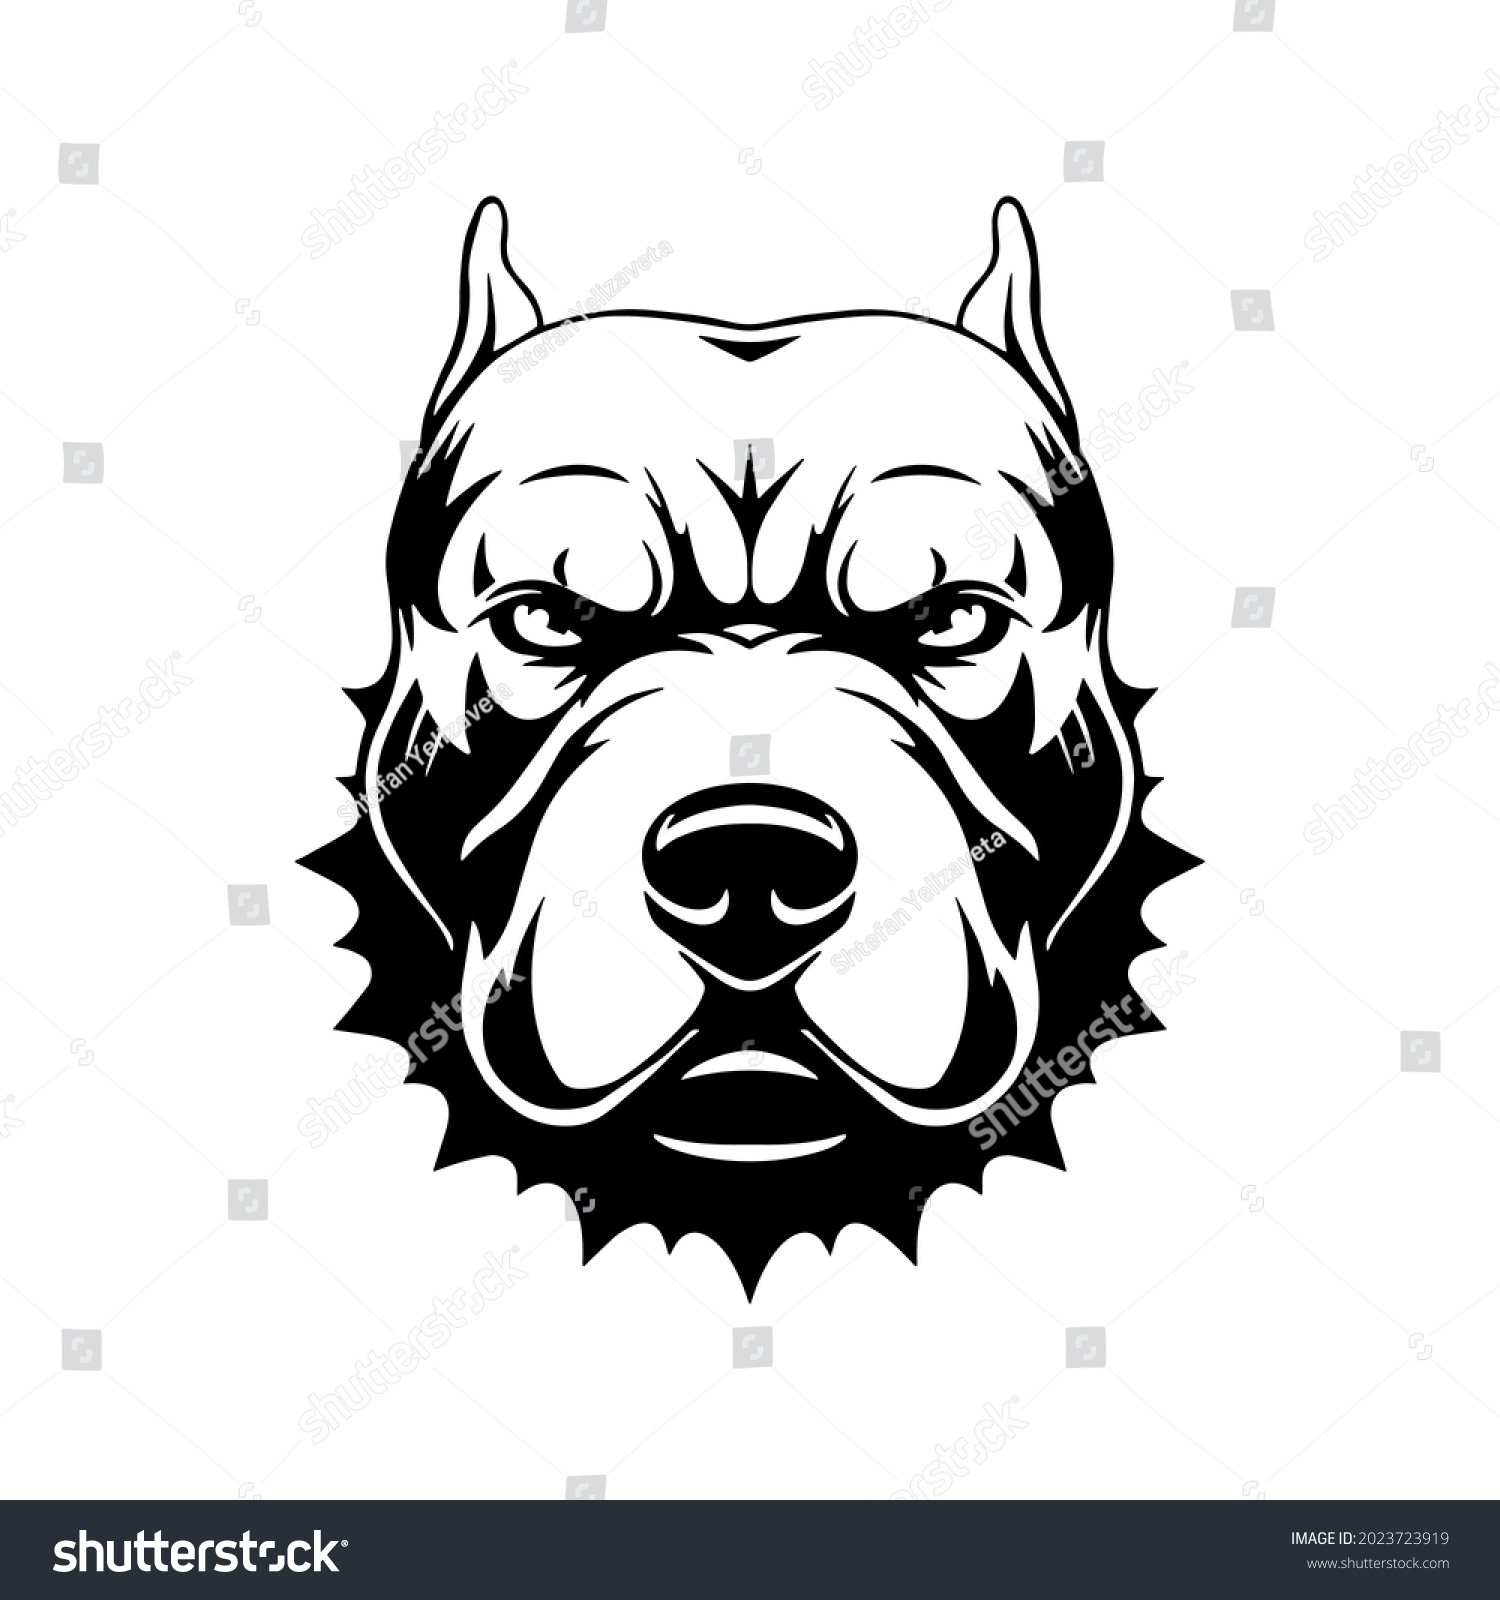 SVG of Pete bull head. Vector illustration. Angry dog svg